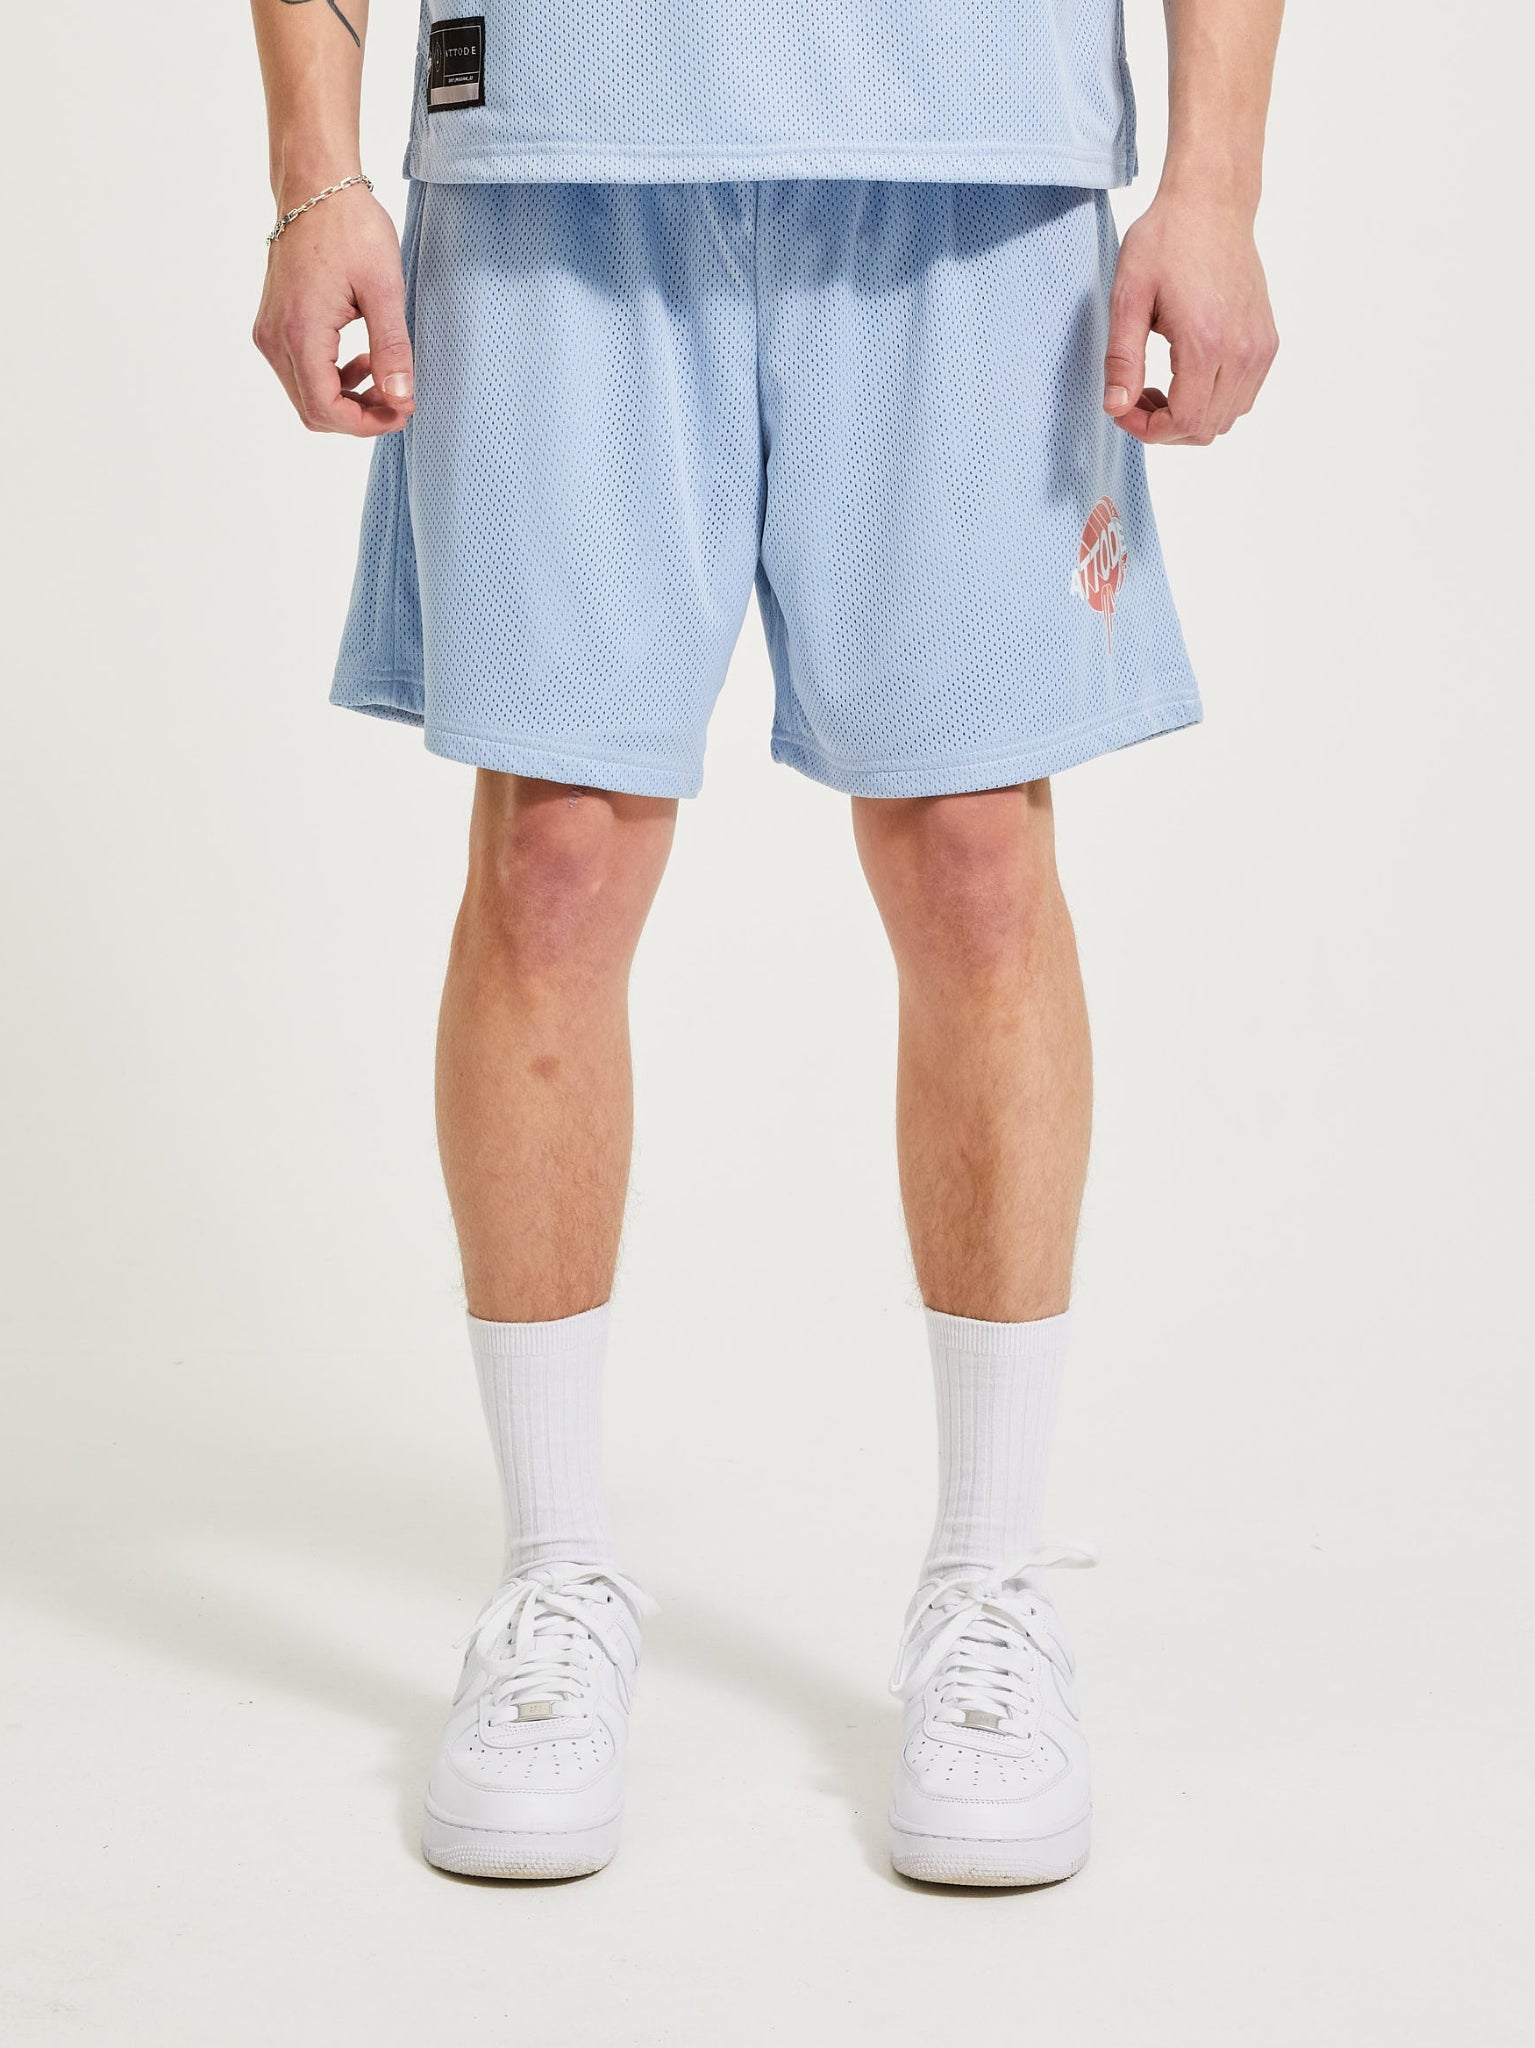 MESH SPORTS SHORTS BABY BLUE - ATTODE